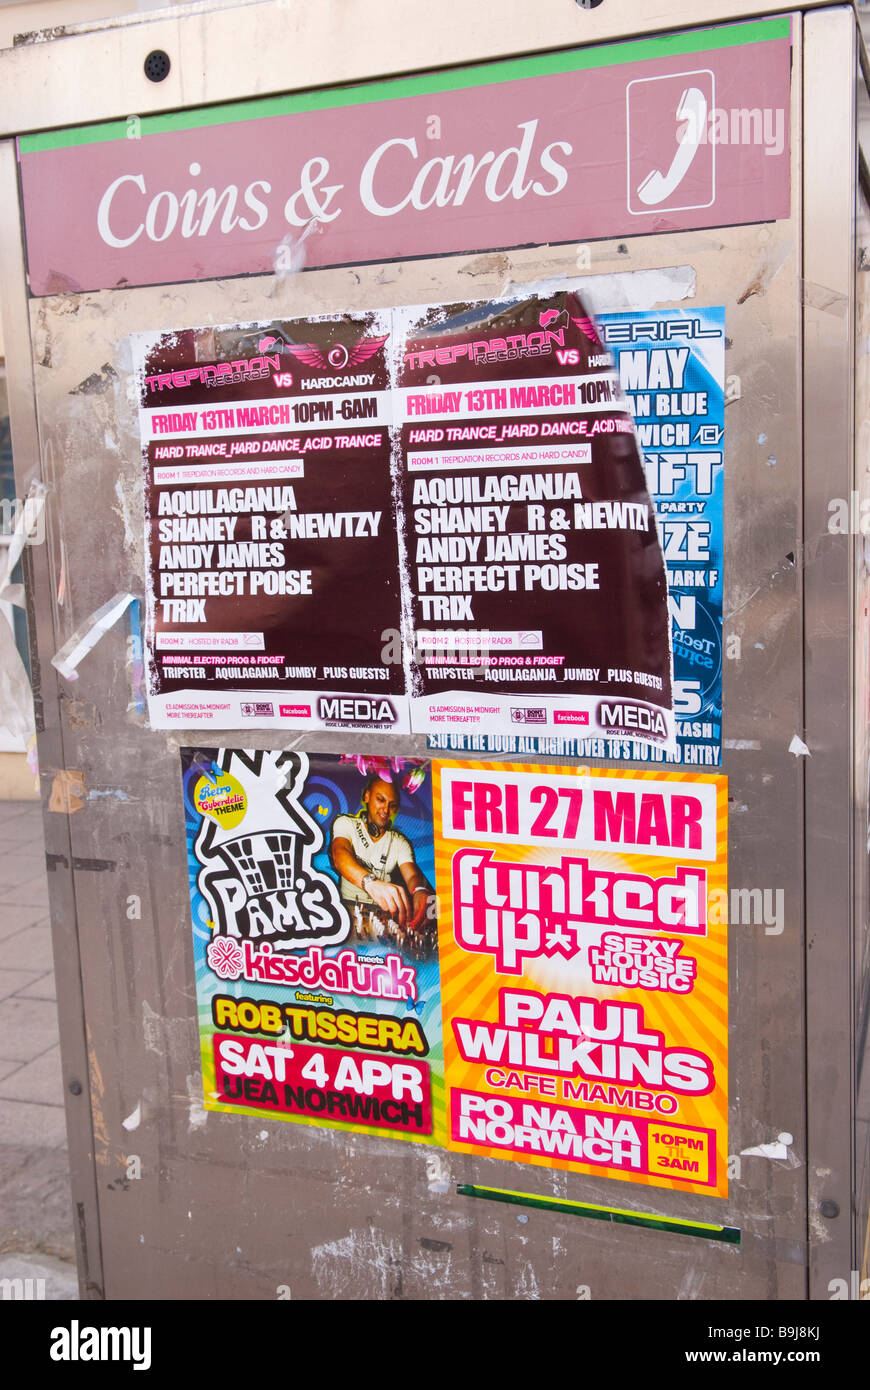 Flyers advertising club nights and DJ's at local nightclubs in Norwich,Norfolk,Uk Stock Photo